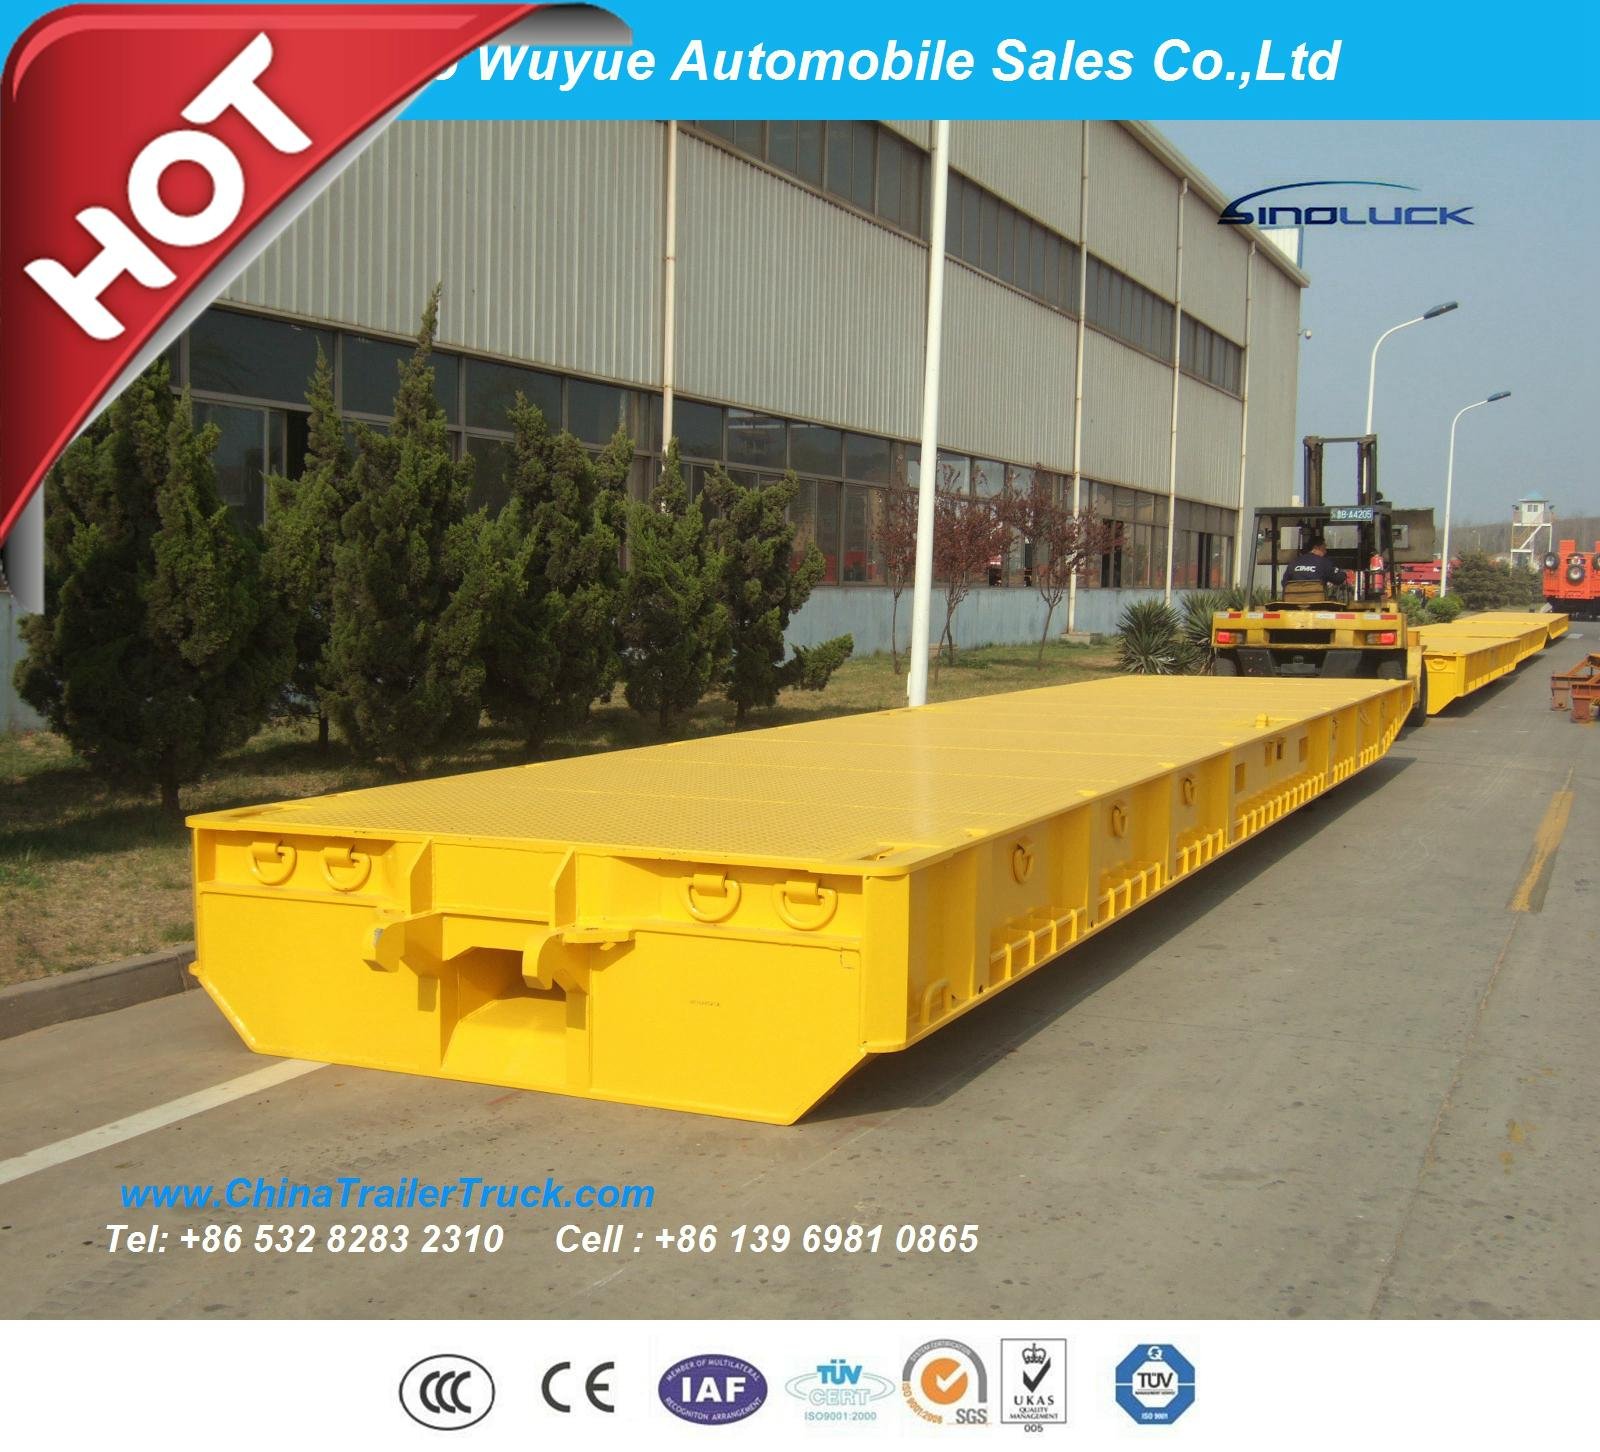 40FT Roll Trailer or Mafi Type Semitrailer with Capacity 100 Tons